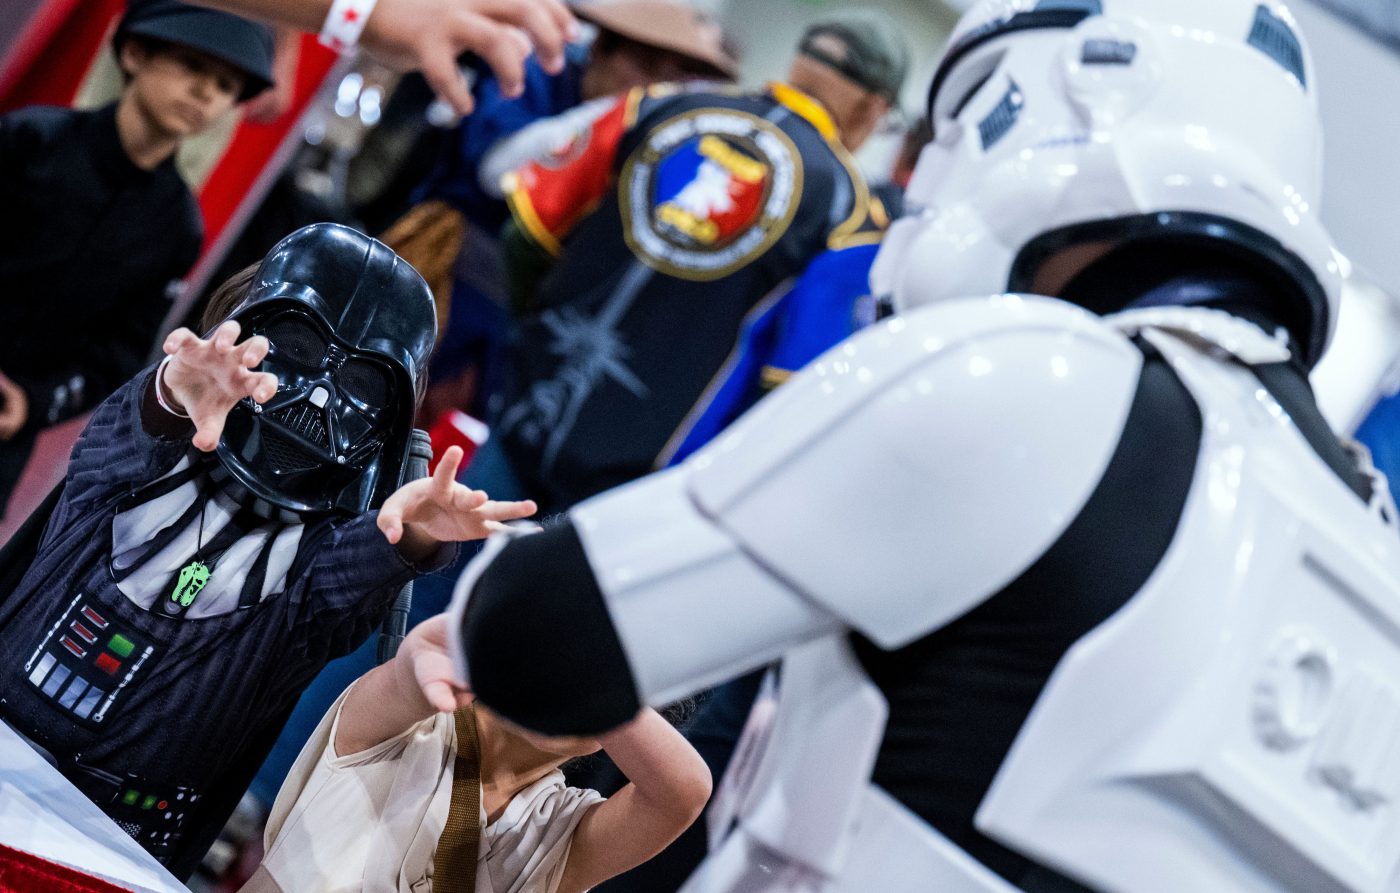 cosplay-and-fun-return-to-ontario-at-comic-con-revolution